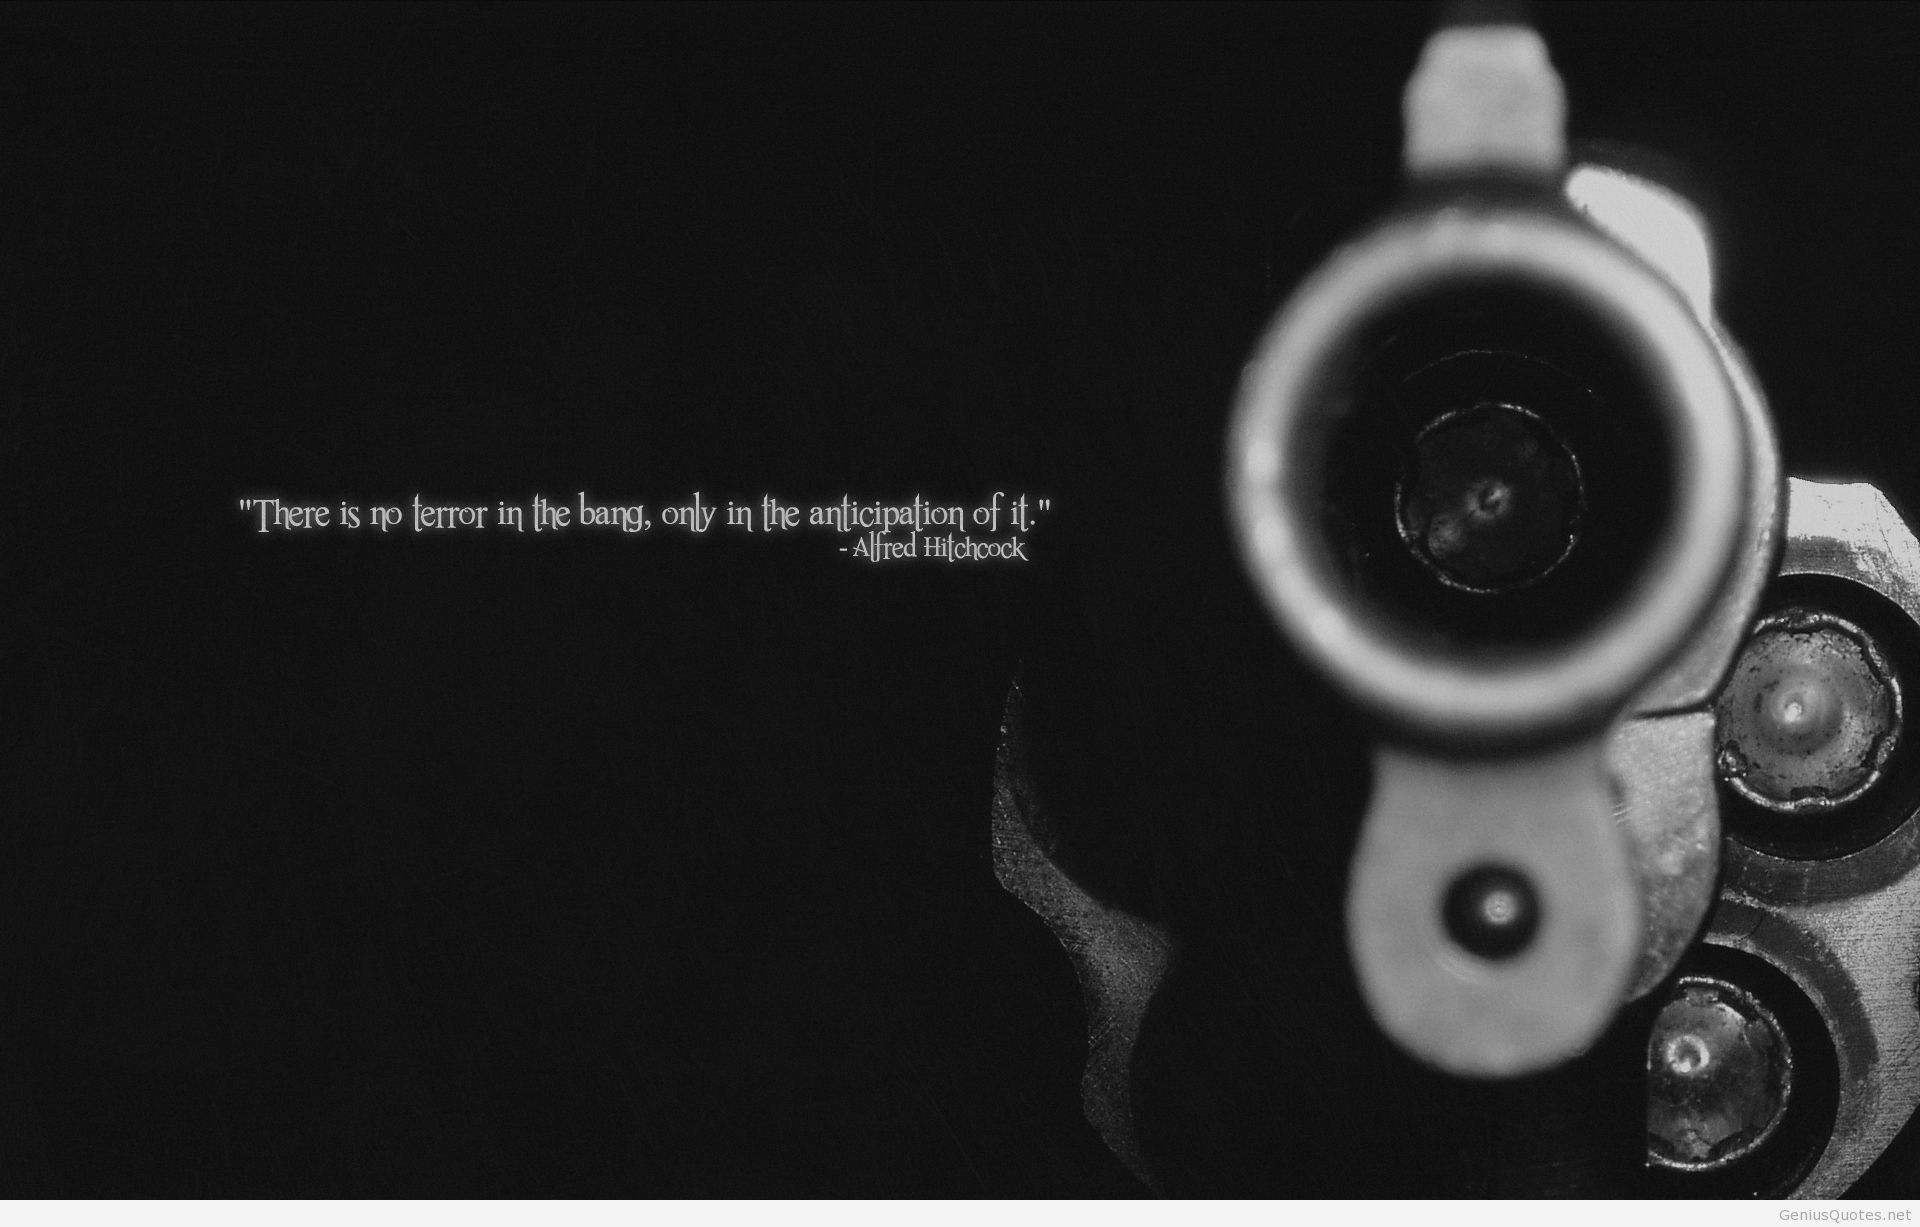 There Is No Terror In The Bang Quote - Italian Mafia Background - HD Wallpaper 